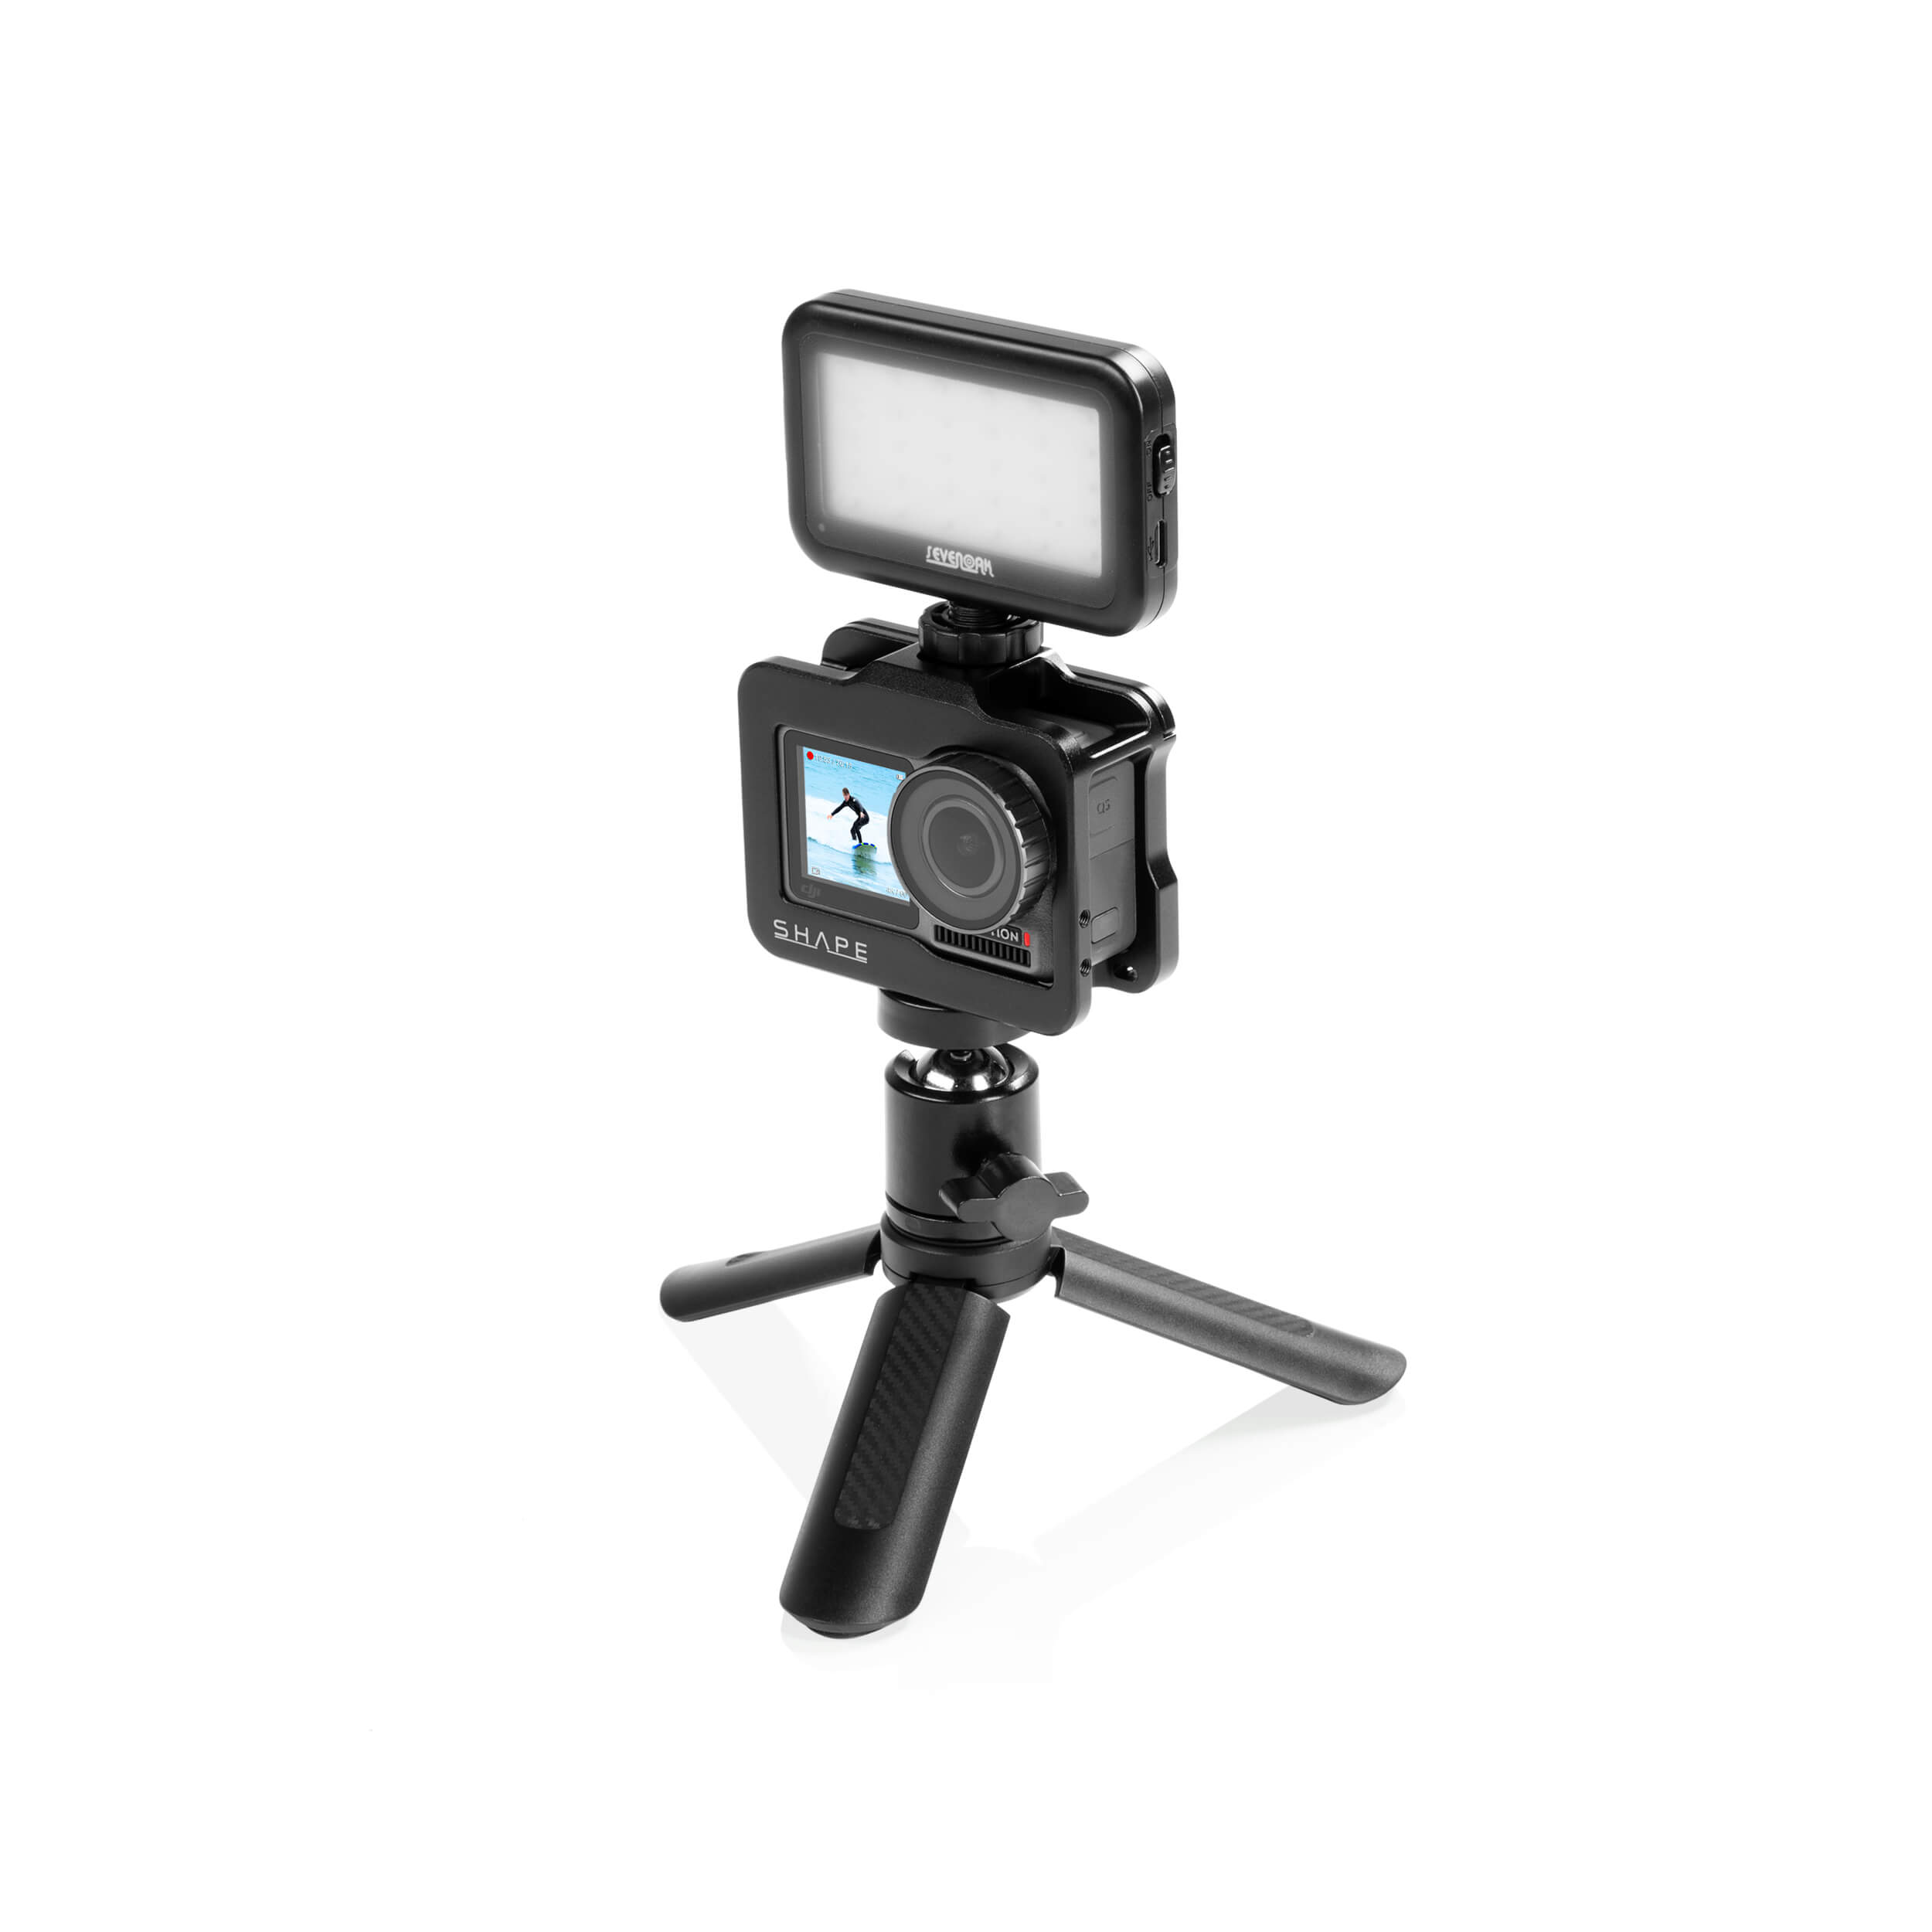 SHAPE Cage for DJI Osmo Action Camera